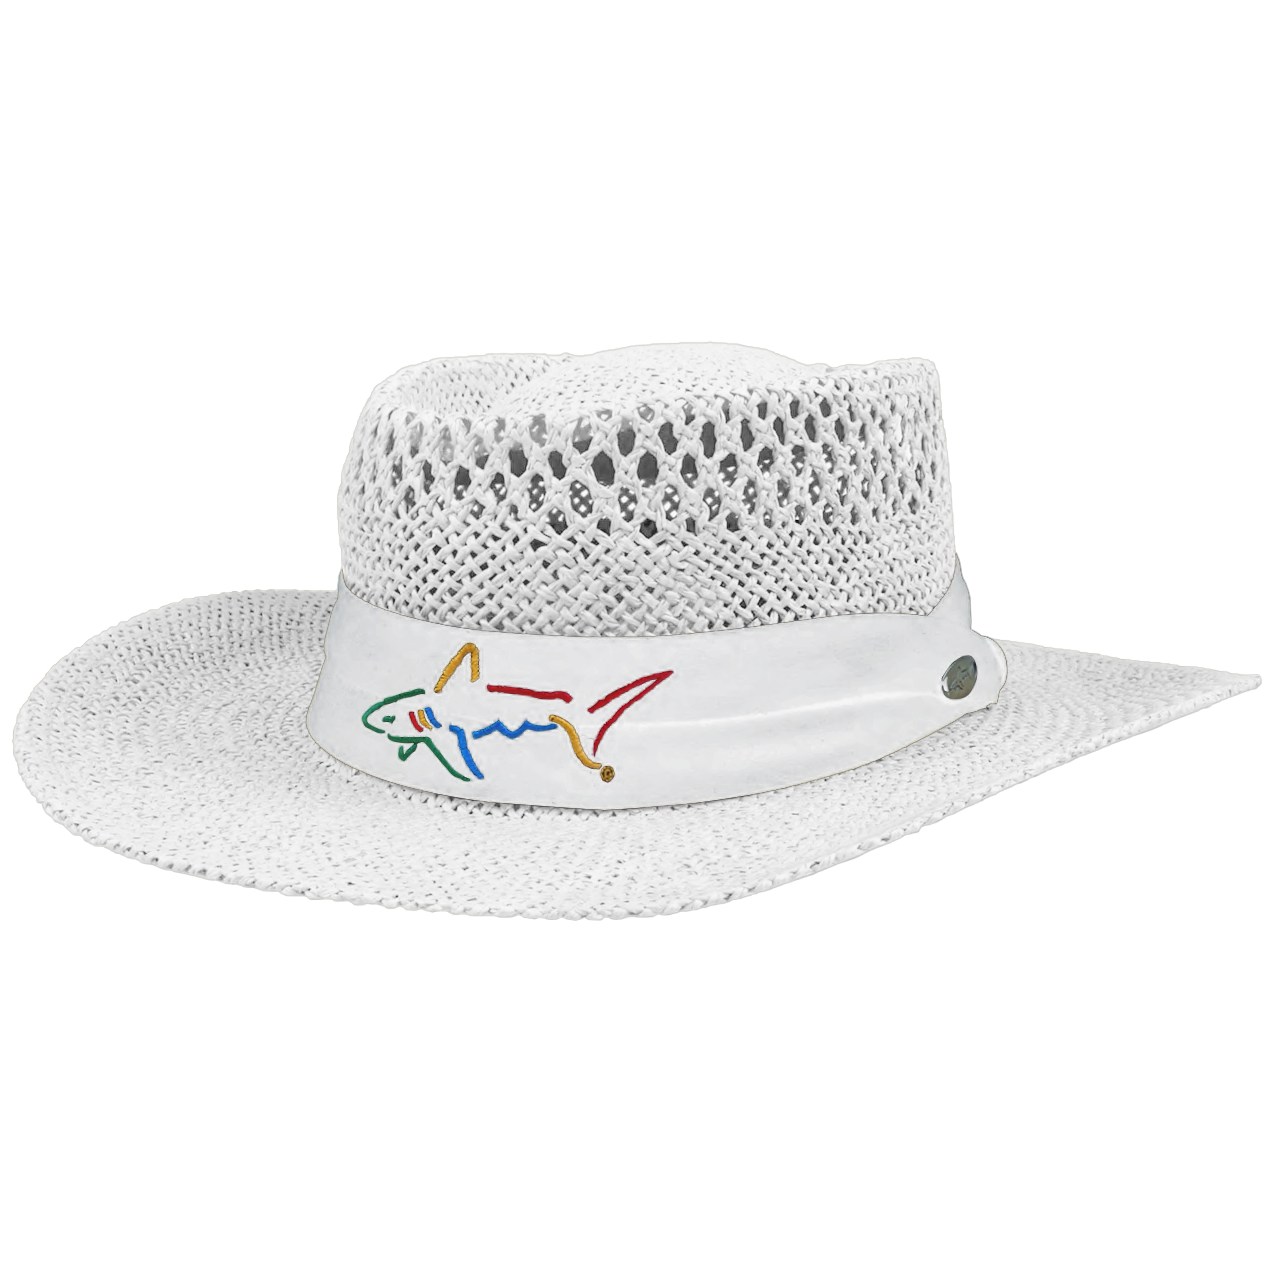 https://cdn11.bigcommerce.com/s-ybxns/images/stencil/1280x1280/products/661/6190/White_straw_hat__30950.1627908418.png?c=2